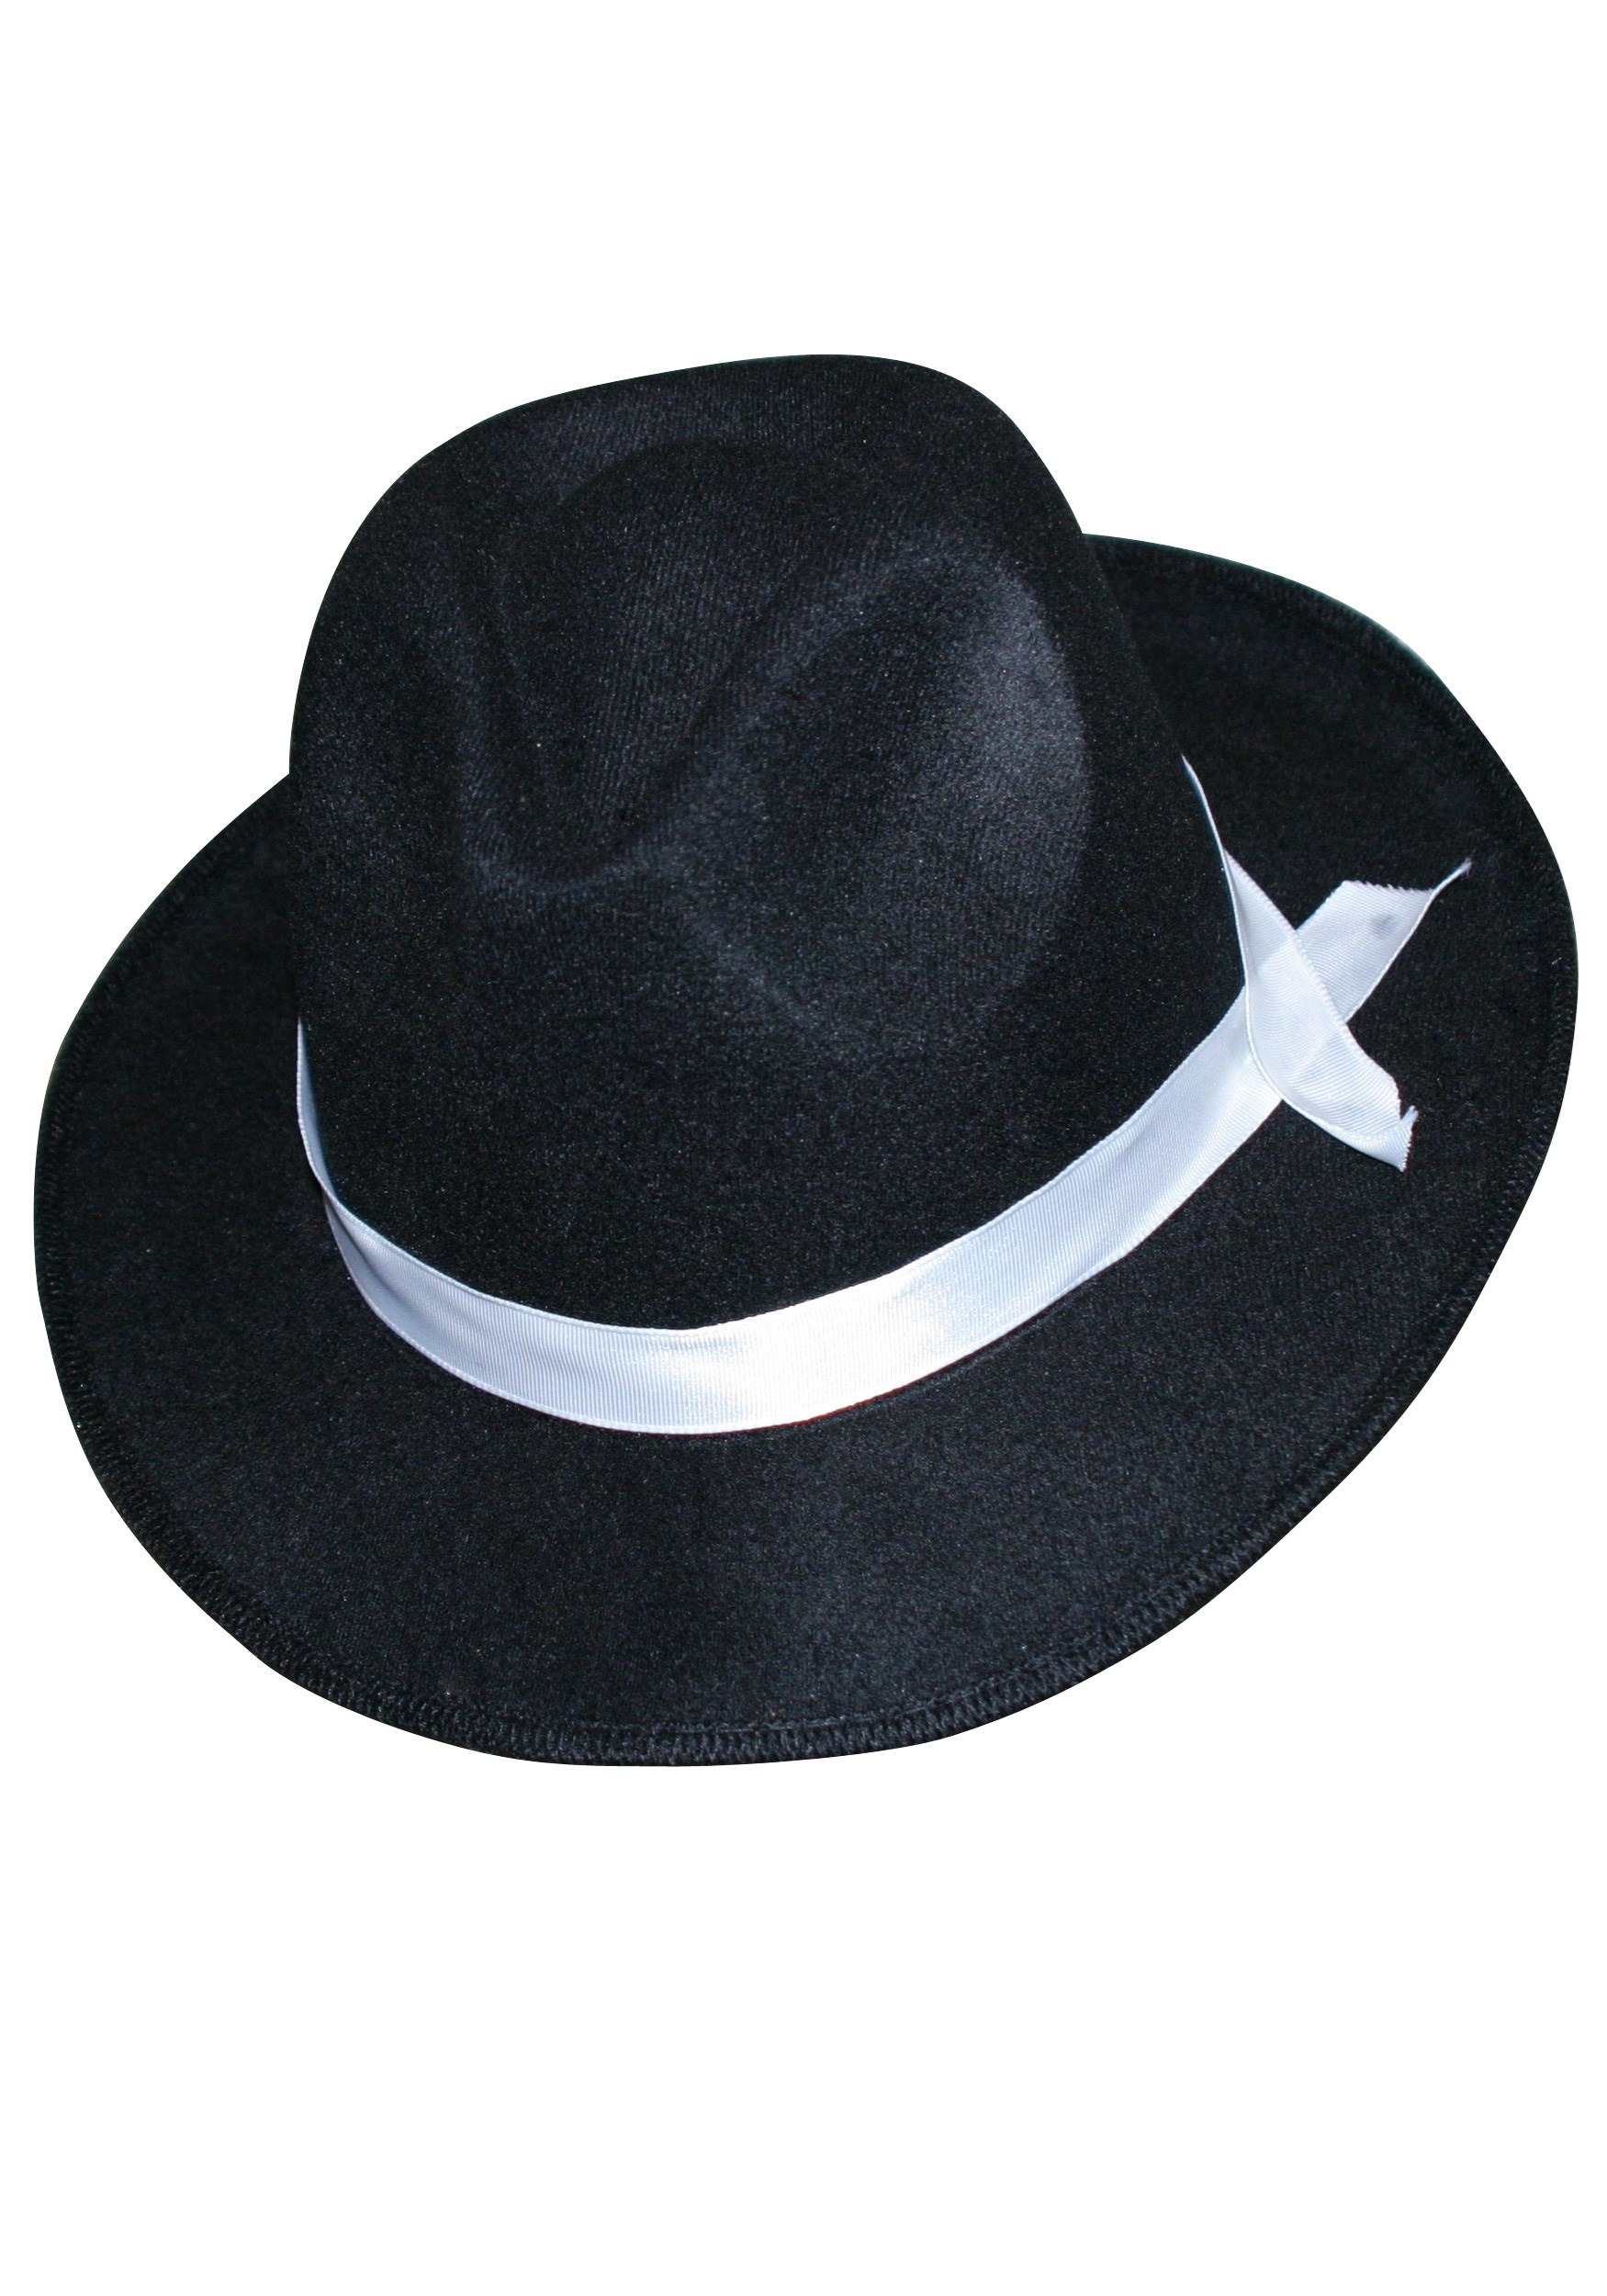 Zoot Suit Mobster Hat for Adults